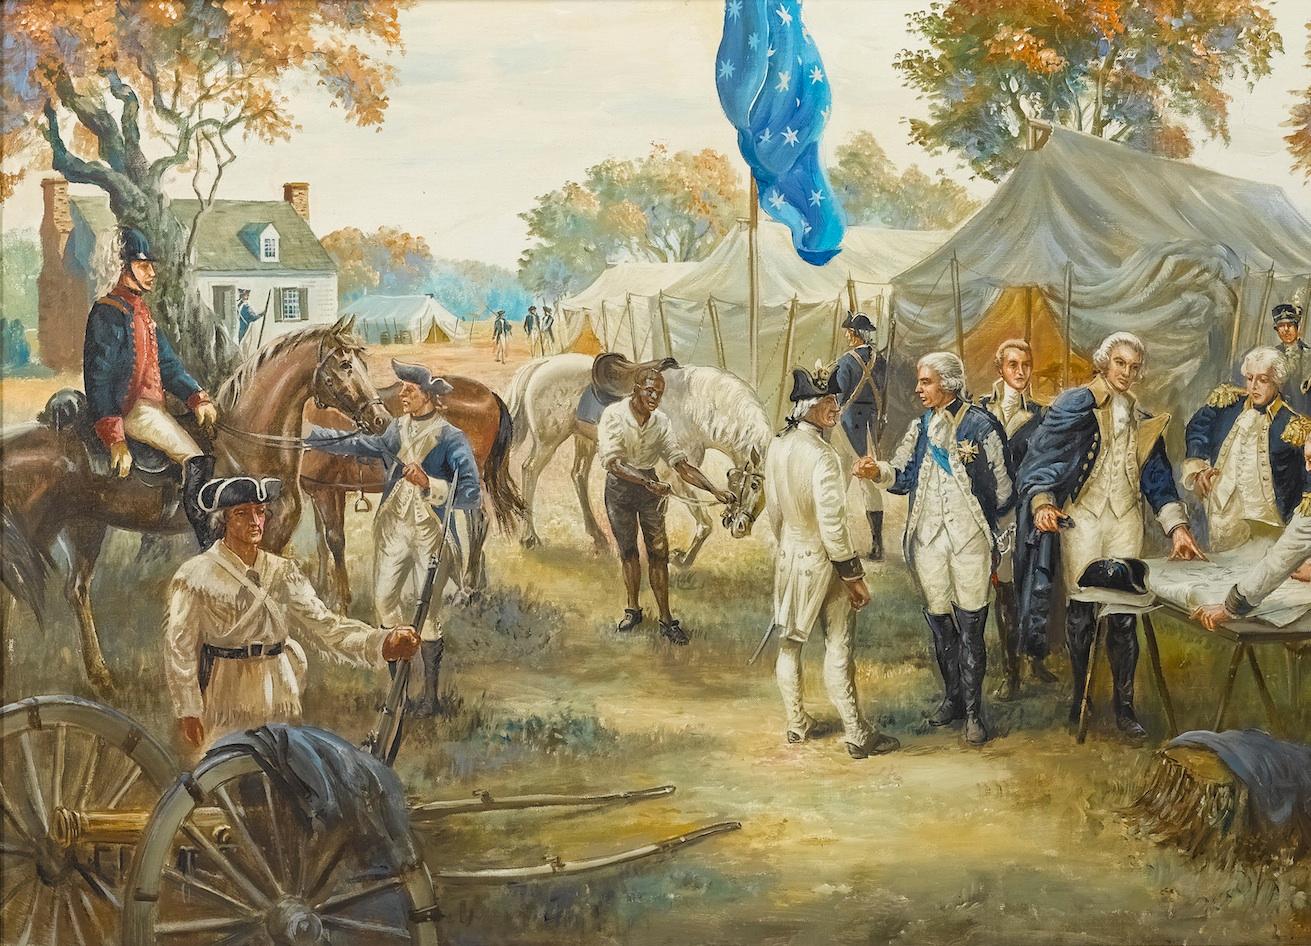 This original oil painting by Sidney E. King depicts General George Washington’s 1781 headquarters in Yorktown, Virginia. The background of this painting is comprised of tents that General Washington employed as part of his Army’s Headquarters.